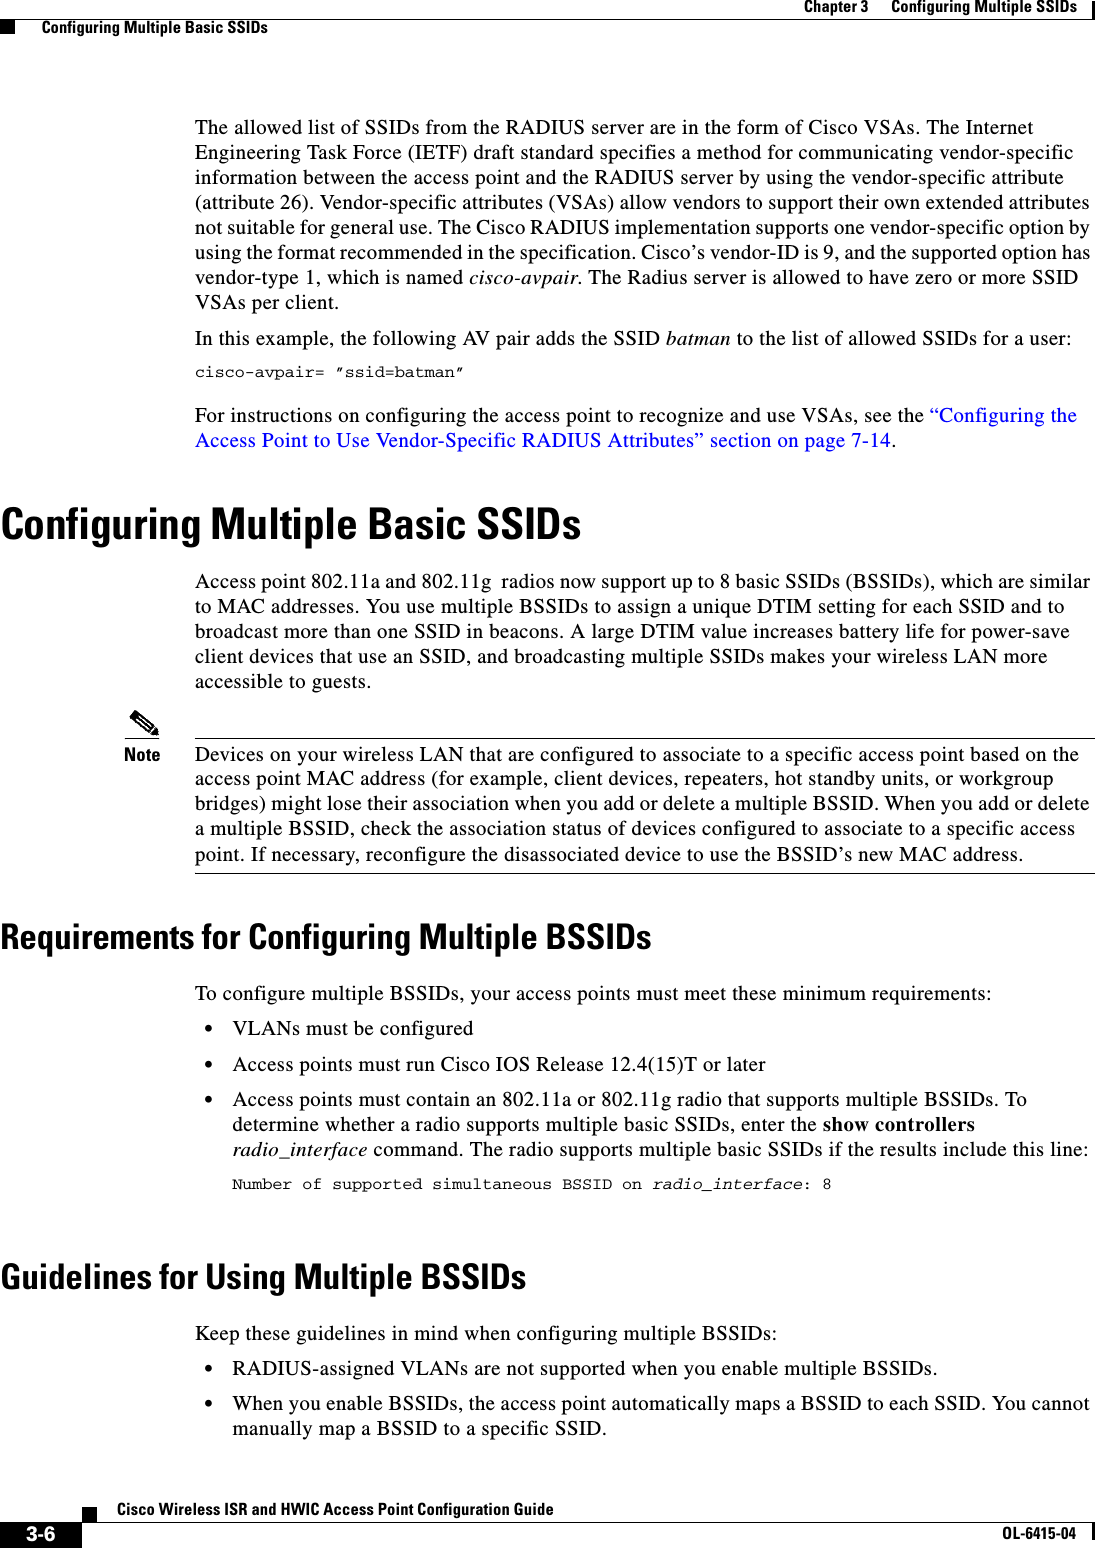  3-6Cisco Wireless ISR and HWIC Access Point Configuration GuideOL-6415-04Chapter 3      Configuring Multiple SSIDs  Configuring Multiple Basic SSIDsThe allowed list of SSIDs from the RADIUS server are in the form of Cisco VSAs. The Internet Engineering Task Force (IETF) draft standard specifies a method for communicating vendor-specific information between the access point and the RADIUS server by using the vendor-specific attribute (attribute 26). Vendor-specific attributes (VSAs) allow vendors to support their own extended attributes not suitable for general use. The Cisco RADIUS implementation supports one vendor-specific option by using the format recommended in the specification. Cisco’s vendor-ID is 9, and the supported option has vendor-type 1, which is named cisco-avpair. The Radius server is allowed to have zero or more SSID VSAs per client. In this example, the following AV pair adds the SSID batman to the list of allowed SSIDs for a user:cisco-avpair= ”ssid=batman”For instructions on configuring the access point to recognize and use VSAs, see the “Configuring the Access Point to Use Vendor-Specific RADIUS Attributes” section on page 7-14.Configuring Multiple Basic SSIDsAccess point 802.11a and 802.11g  radios now support up to 8 basic SSIDs (BSSIDs), which are similar to MAC addresses. You use multiple BSSIDs to assign a unique DTIM setting for each SSID and to broadcast more than one SSID in beacons. A large DTIM value increases battery life for power-save client devices that use an SSID, and broadcasting multiple SSIDs makes your wireless LAN more accessible to guests. Note Devices on your wireless LAN that are configured to associate to a specific access point based on the access point MAC address (for example, client devices, repeaters, hot standby units, or workgroup bridges) might lose their association when you add or delete a multiple BSSID. When you add or delete a multiple BSSID, check the association status of devices configured to associate to a specific access point. If necessary, reconfigure the disassociated device to use the BSSID’s new MAC address.Requirements for Configuring Multiple BSSIDsTo configure multiple BSSIDs, your access points must meet these minimum requirements:  • VLANs must be configured  • Access points must run Cisco IOS Release 12.4(15)T or later  • Access points must contain an 802.11a or 802.11g radio that supports multiple BSSIDs. To determine whether a radio supports multiple basic SSIDs, enter the show controllers radio_interface command. The radio supports multiple basic SSIDs if the results include this line:Number of supported simultaneous BSSID on radio_interface: 8 Guidelines for Using Multiple BSSIDsKeep these guidelines in mind when configuring multiple BSSIDs:  • RADIUS-assigned VLANs are not supported when you enable multiple BSSIDs.  • When you enable BSSIDs, the access point automatically maps a BSSID to each SSID. You cannot manually map a BSSID to a specific SSID.